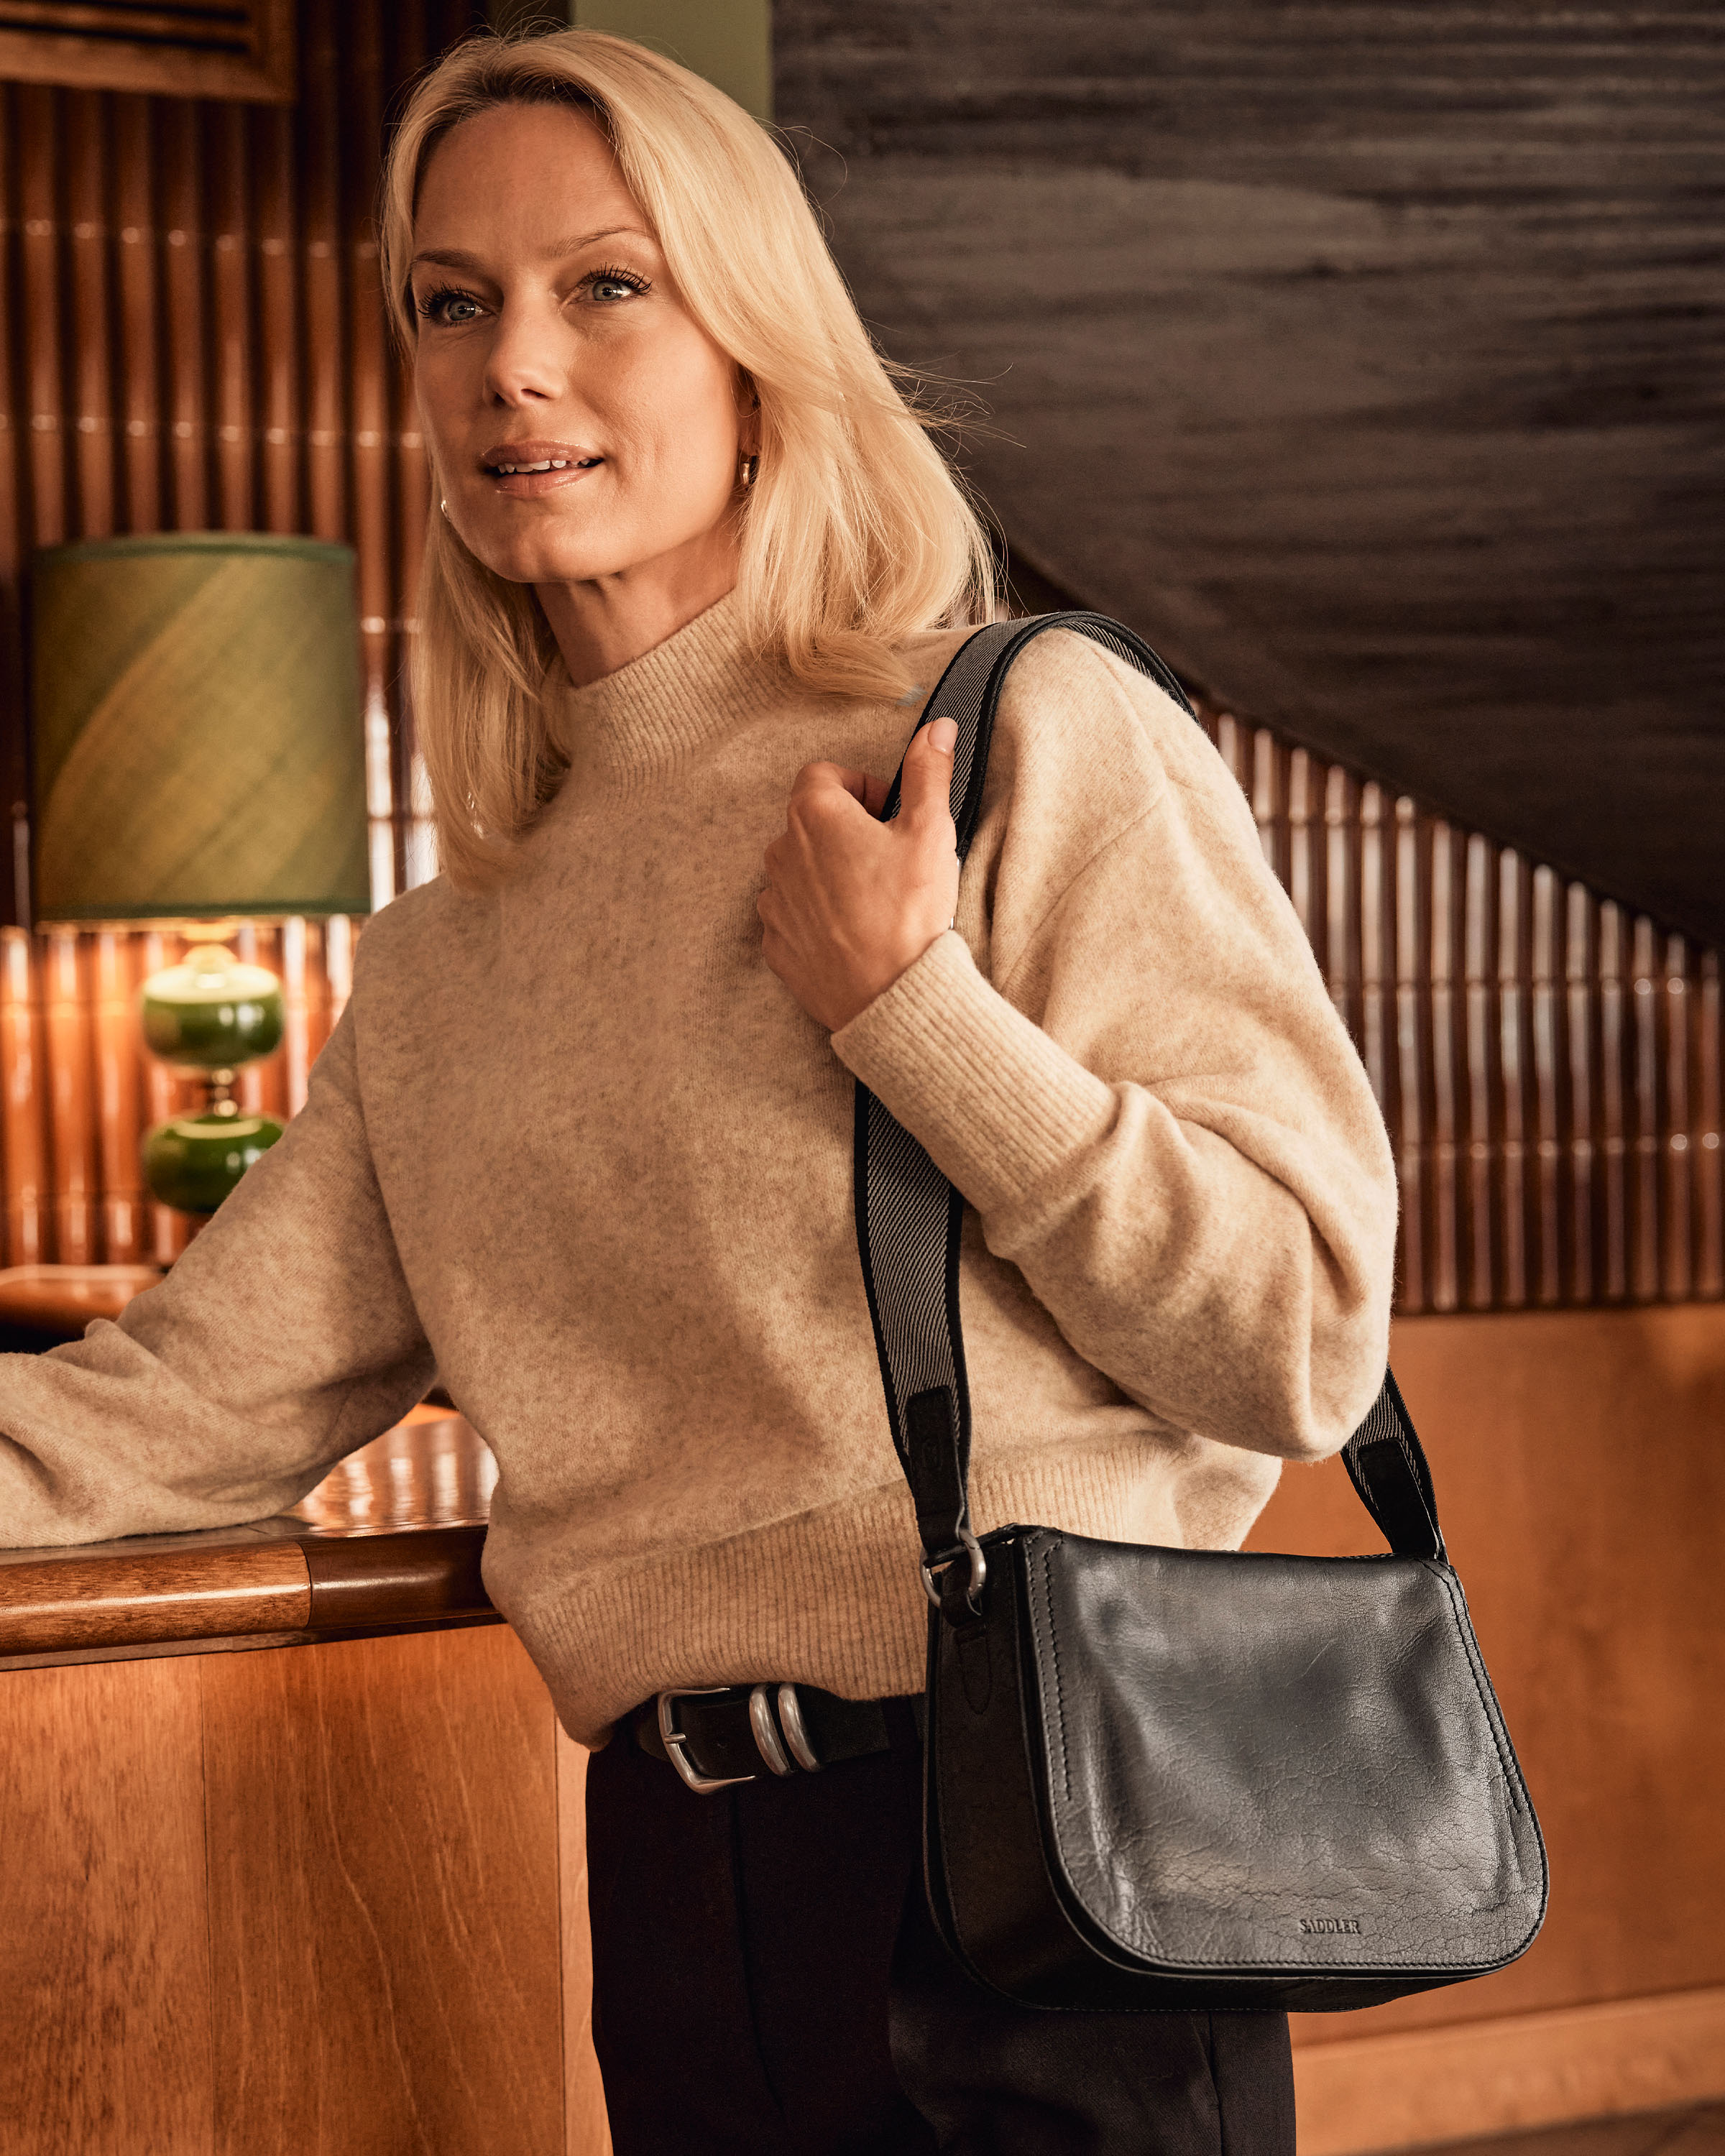 Bags for women at saddler.com - The swedish leather brand